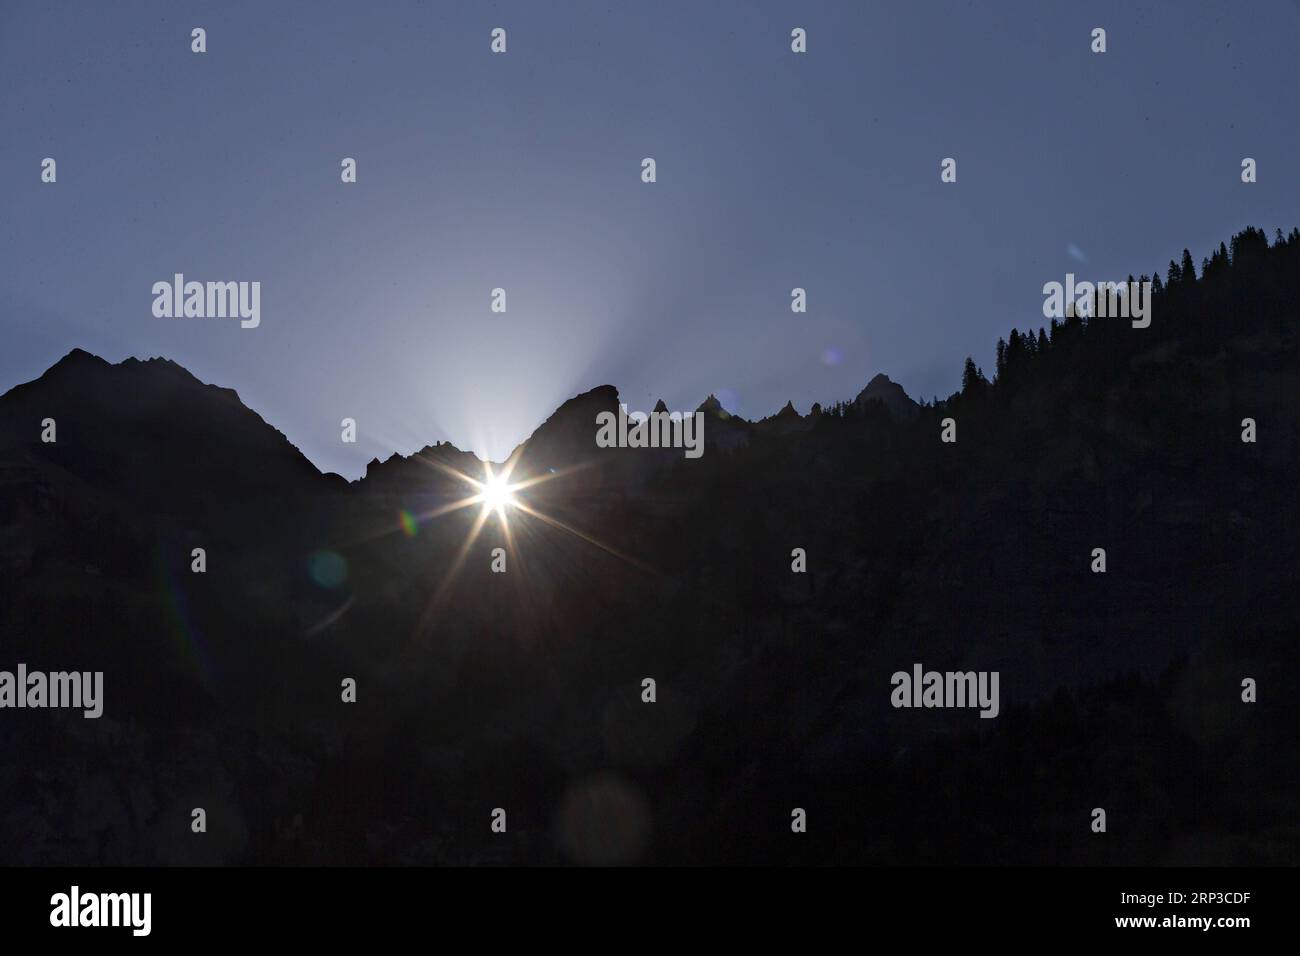 (180930) -- ELM, Sept. 30, 2018 -- The sun shines through the Martin s Hole directly onto Elm, in the Canton of Glarus, Switzerland, Sept. 30, 2018. The 22x19 meter wide rock window is located approximately 2,600m above sea level in the large Tschingelhorn mountain. This unusual phenomenon takes place for a few minutes shortly on several days in spring and autumn every year. ) (lrz) SWITZERLAND-ELM-MARTIN S HOLE MichelexLimina PUBLICATIONxNOTxINxCHN Stock Photo